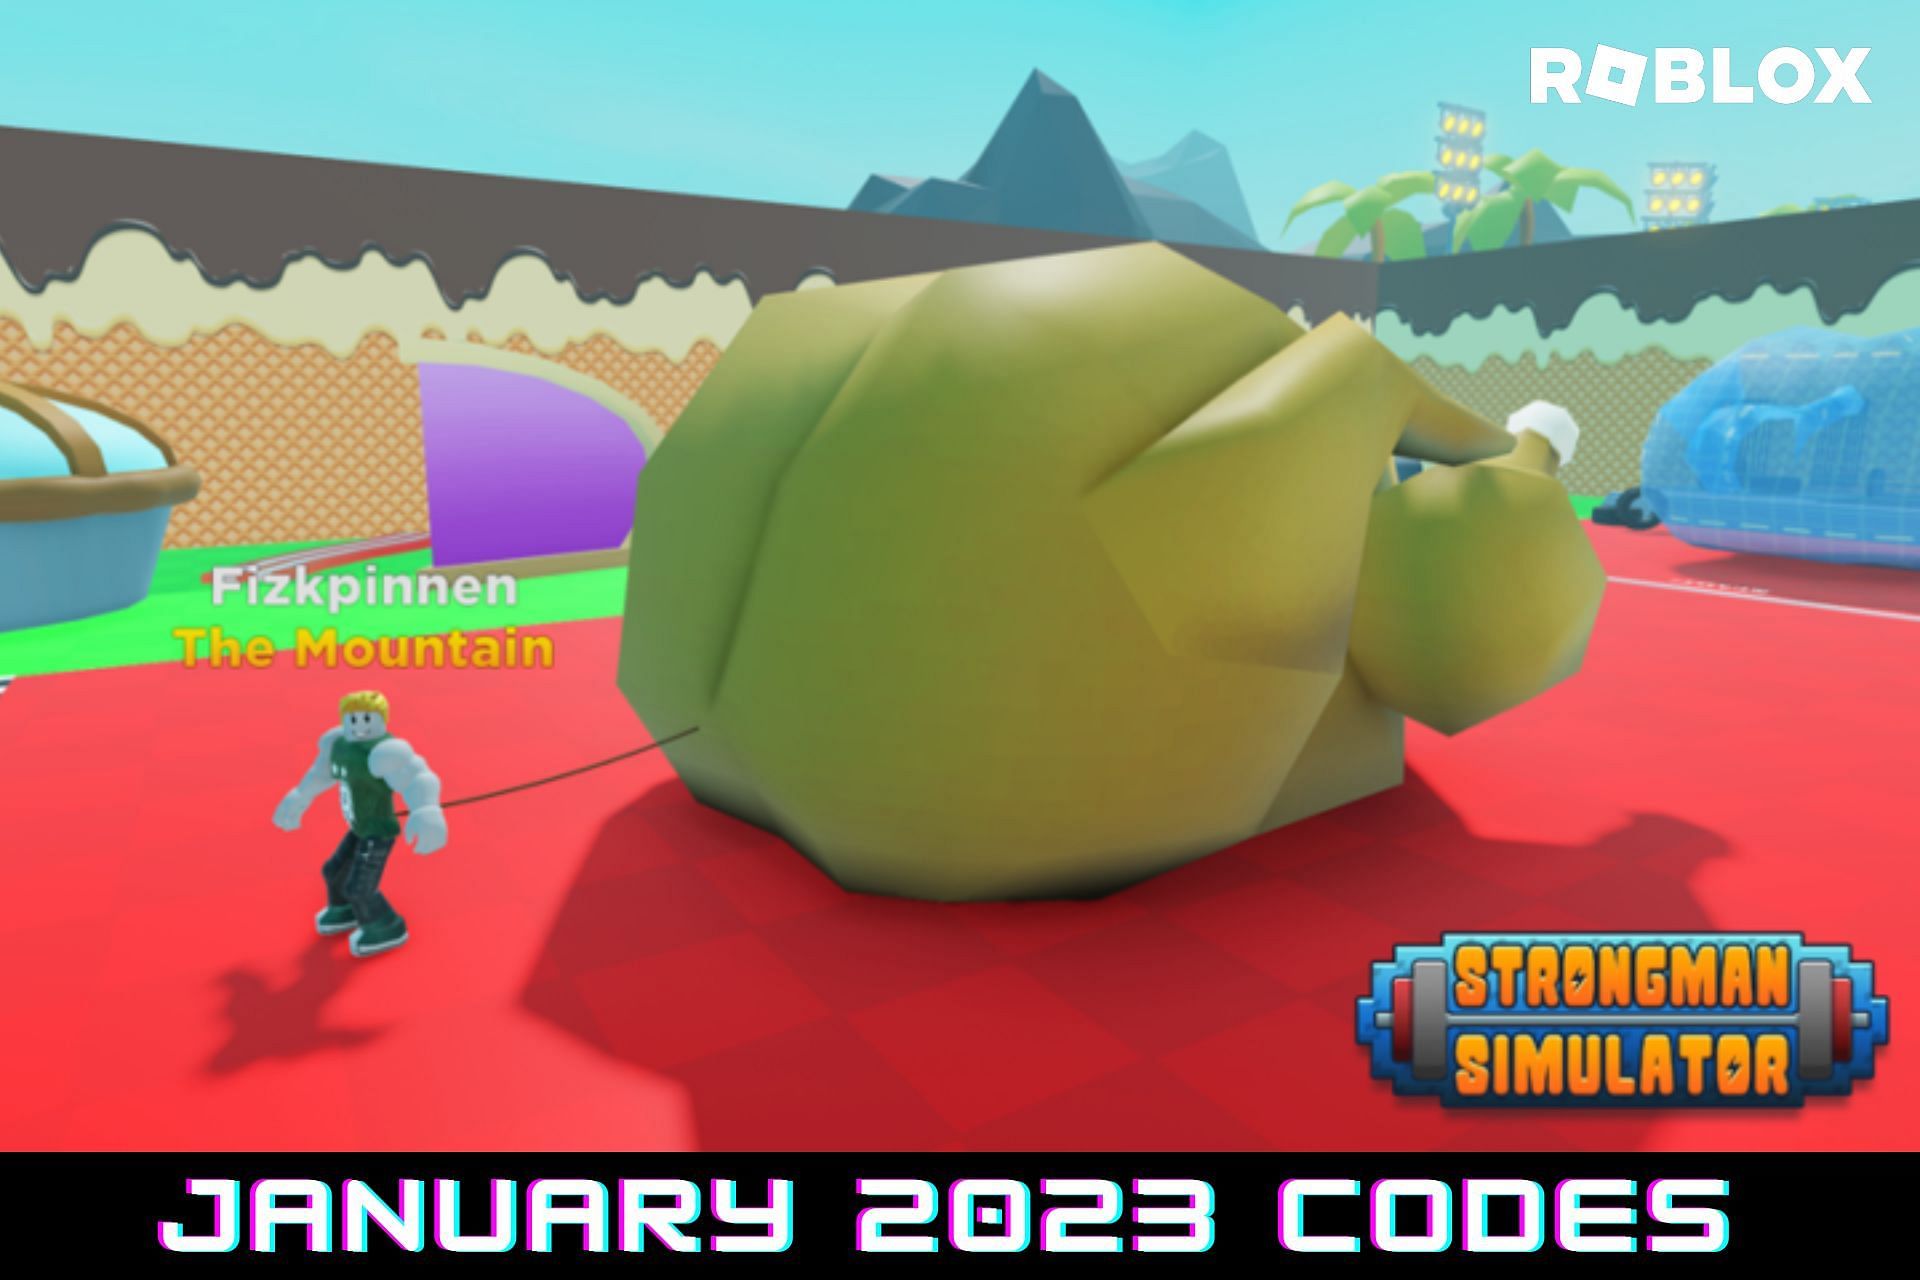 roblox-strongman-simulator-codes-for-january-2023-free-boosts-pets-and-more